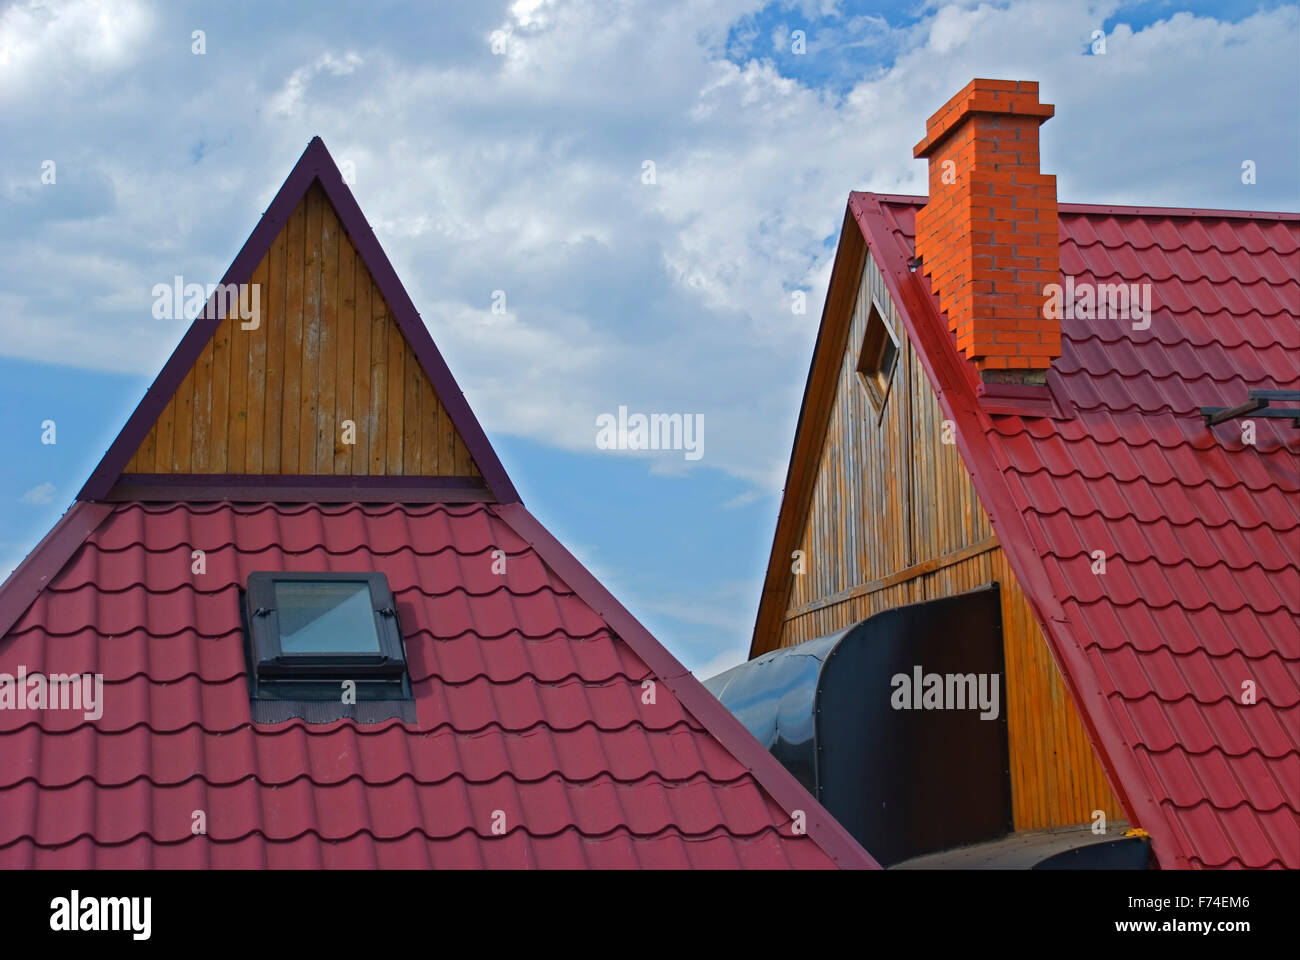 Roofs of houses Stock Photo